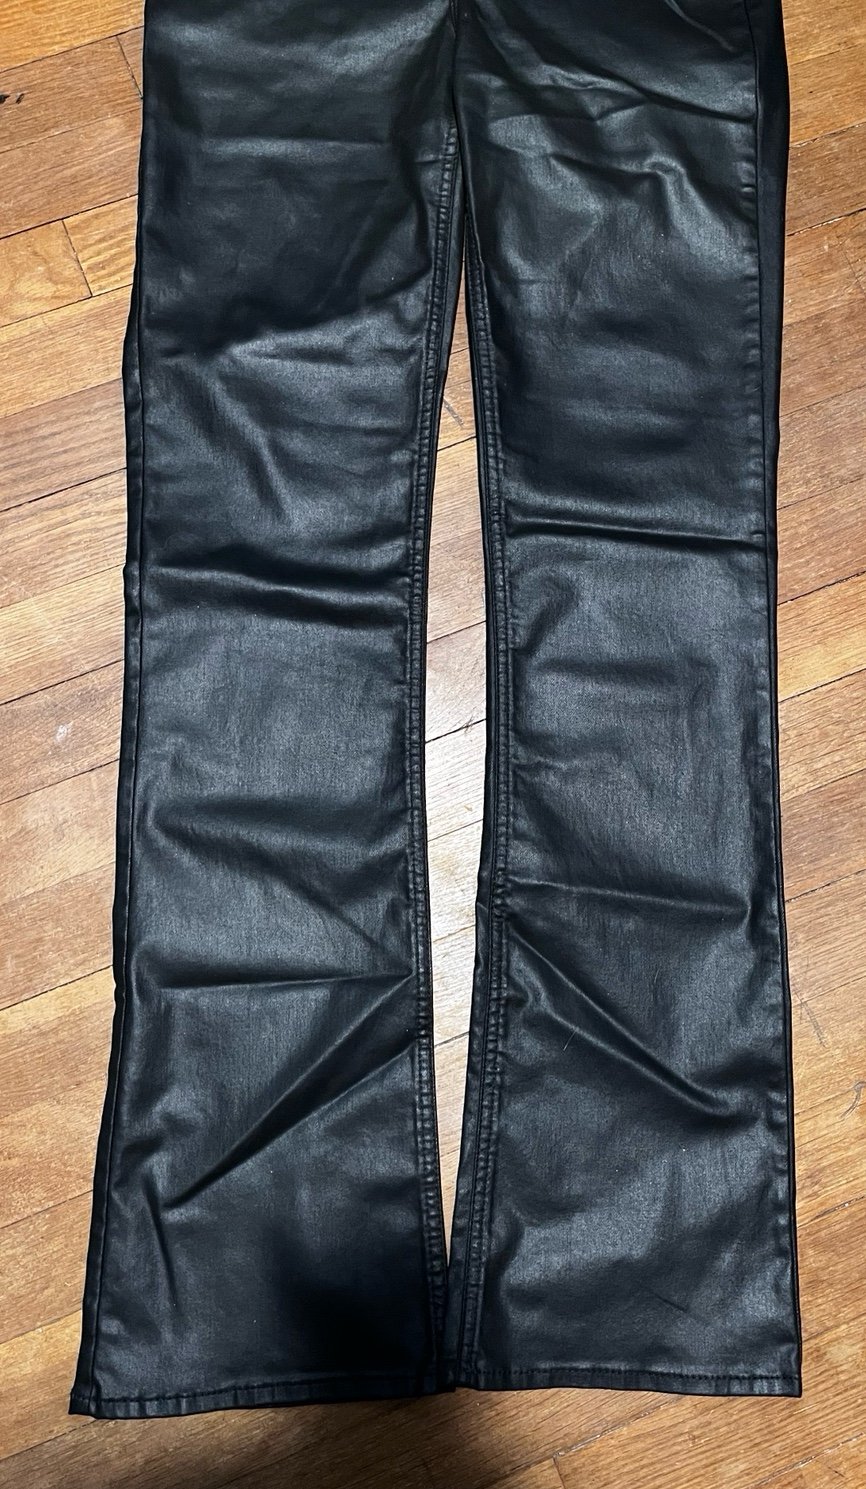 Exclusive womens leather pants LKaXNRvfB hot sale